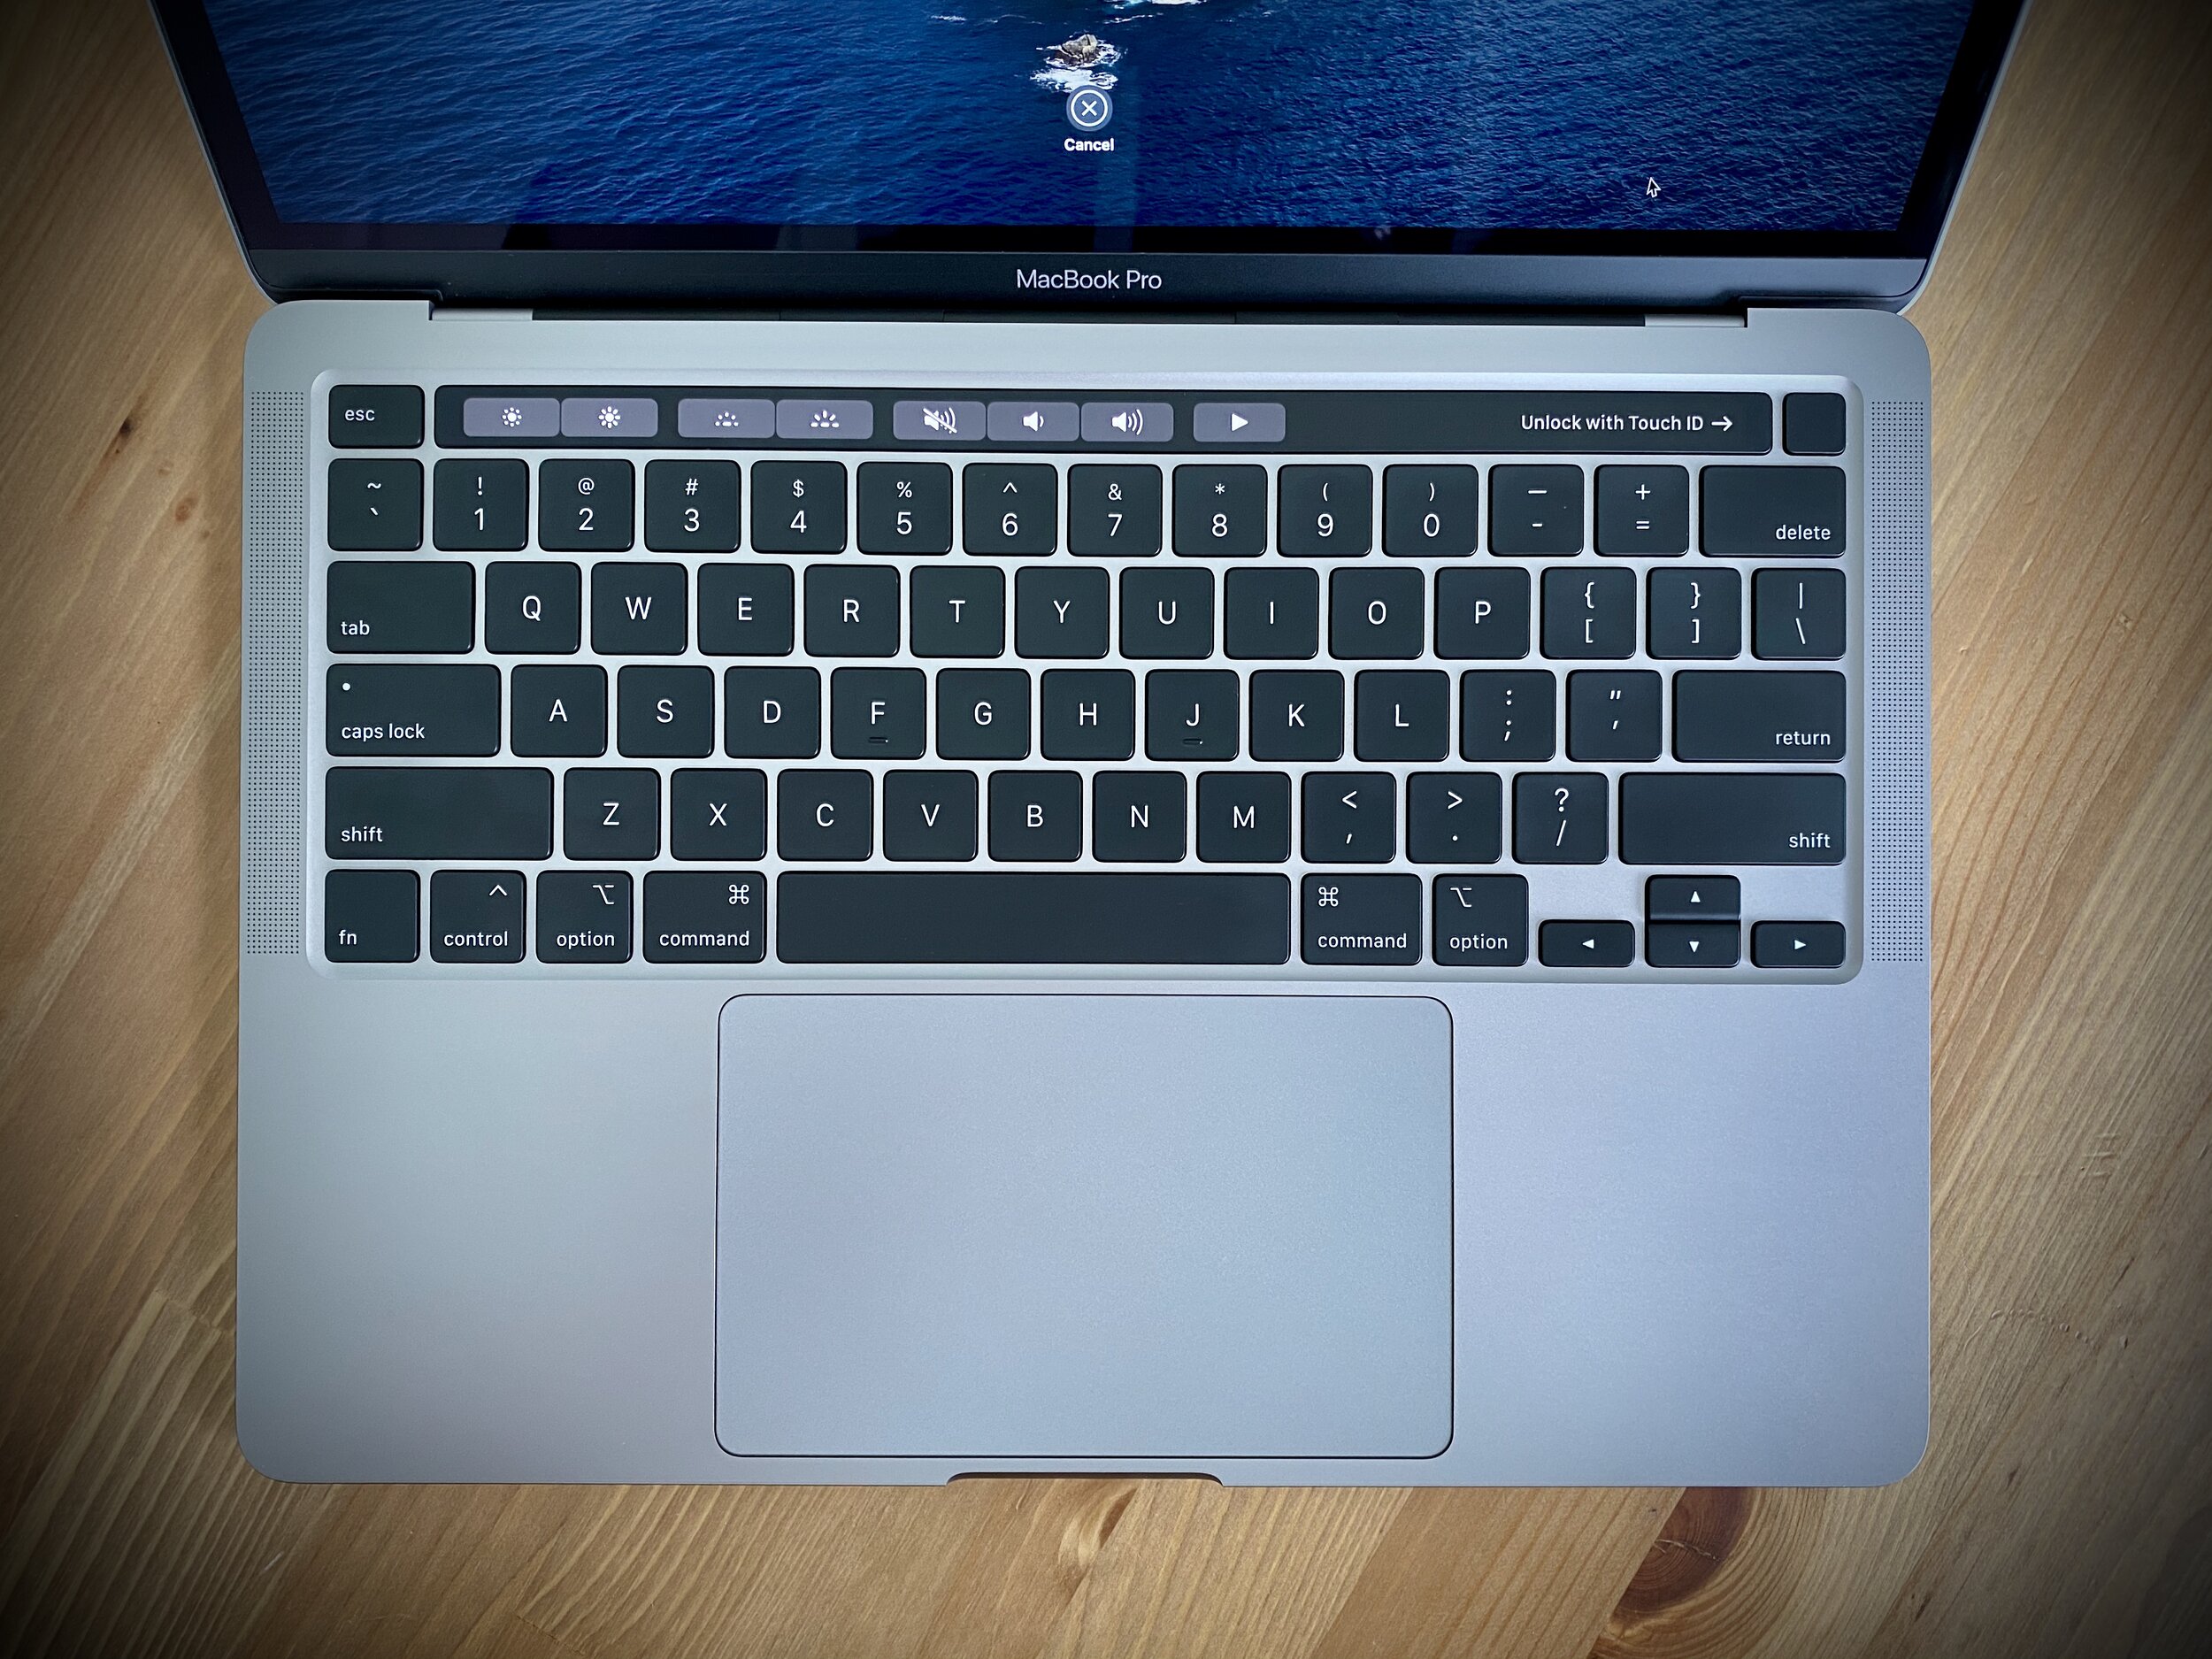 2020 13 Inch Macbook Pro Review It S All About Tdp Mccann Tech